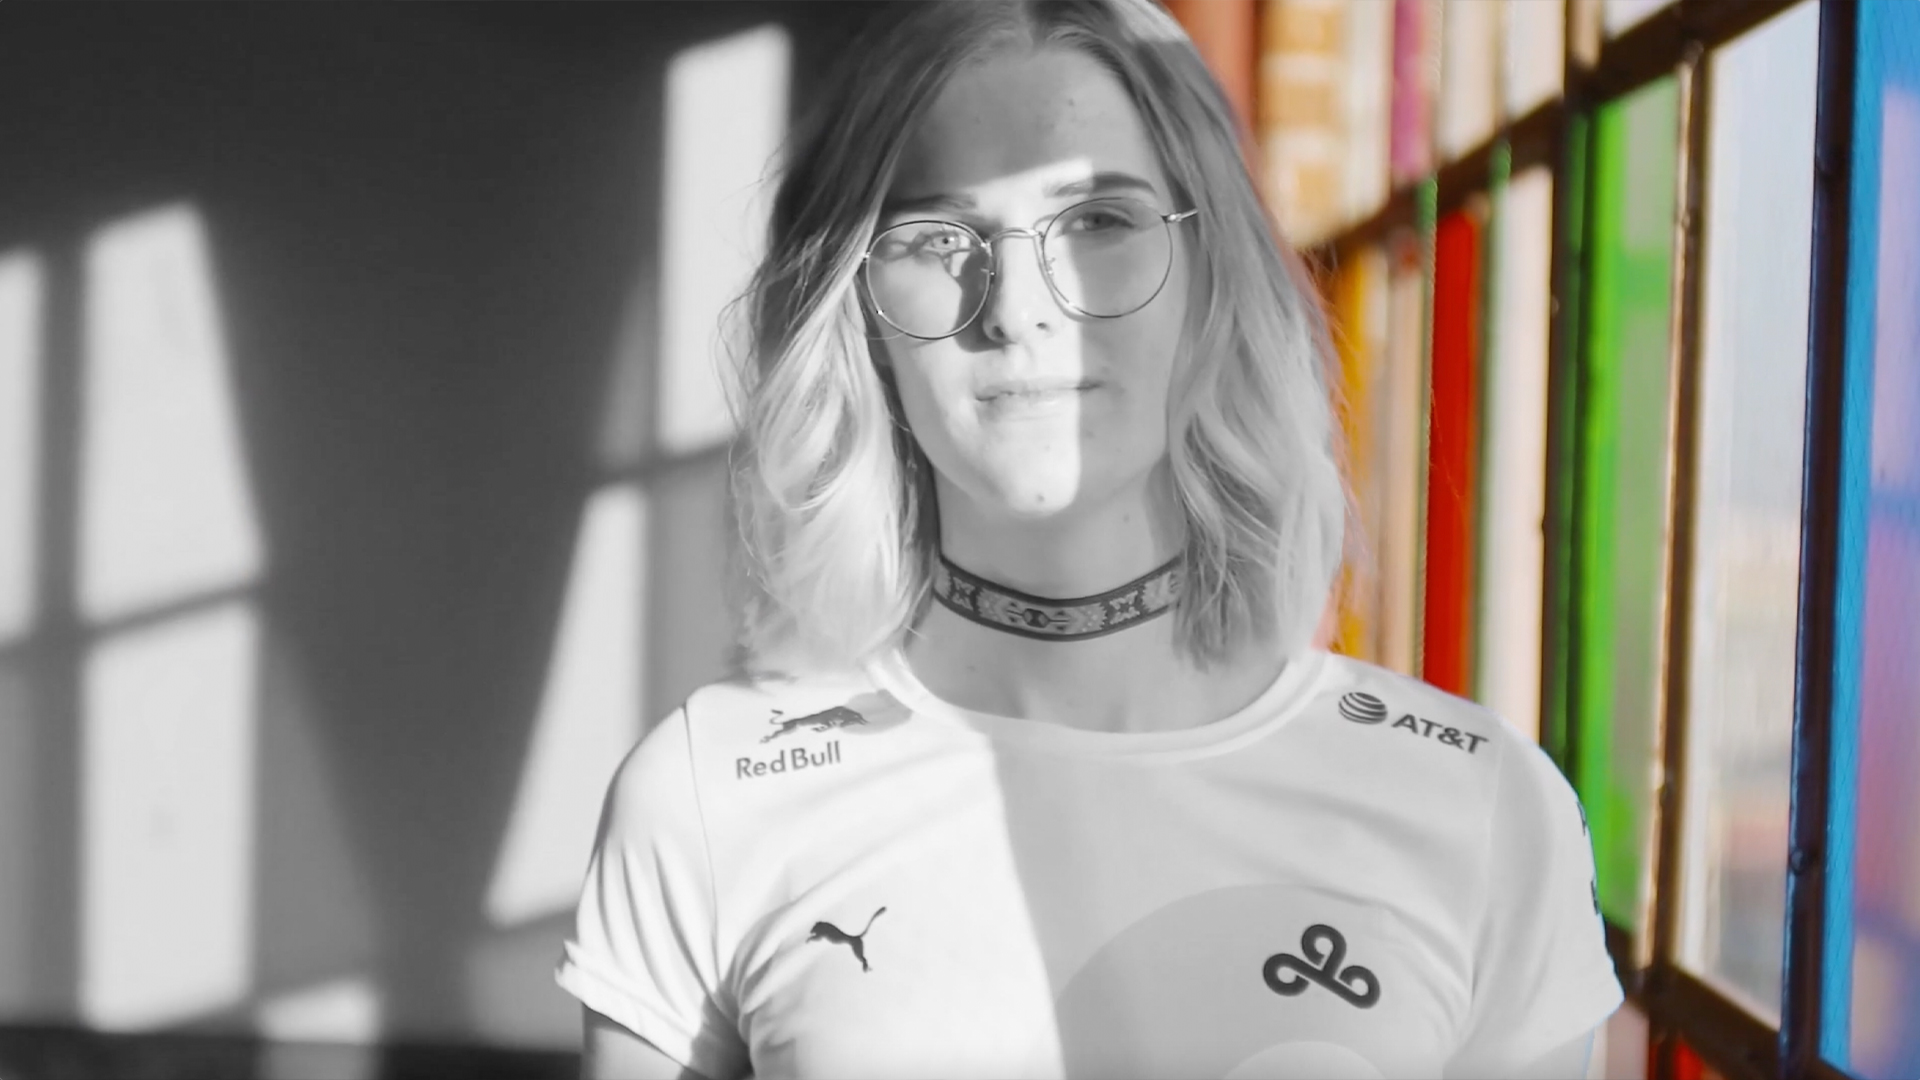 Entrusted with the Flex position for the all-women Valorant team at Cloud9, Annie must be able to adapt to certain situations in order to ensure her team’s success. The role on this team has made her acutely aware of the optics-the importance of having meaningful representation in esports for girls who may be watching and dreaming from home. “I could care less if a guy came up to me and said, ‘You’re only signed because you’re a girl’. I was signed for other girls and younger people to look at me and have dreams and inspirations.”